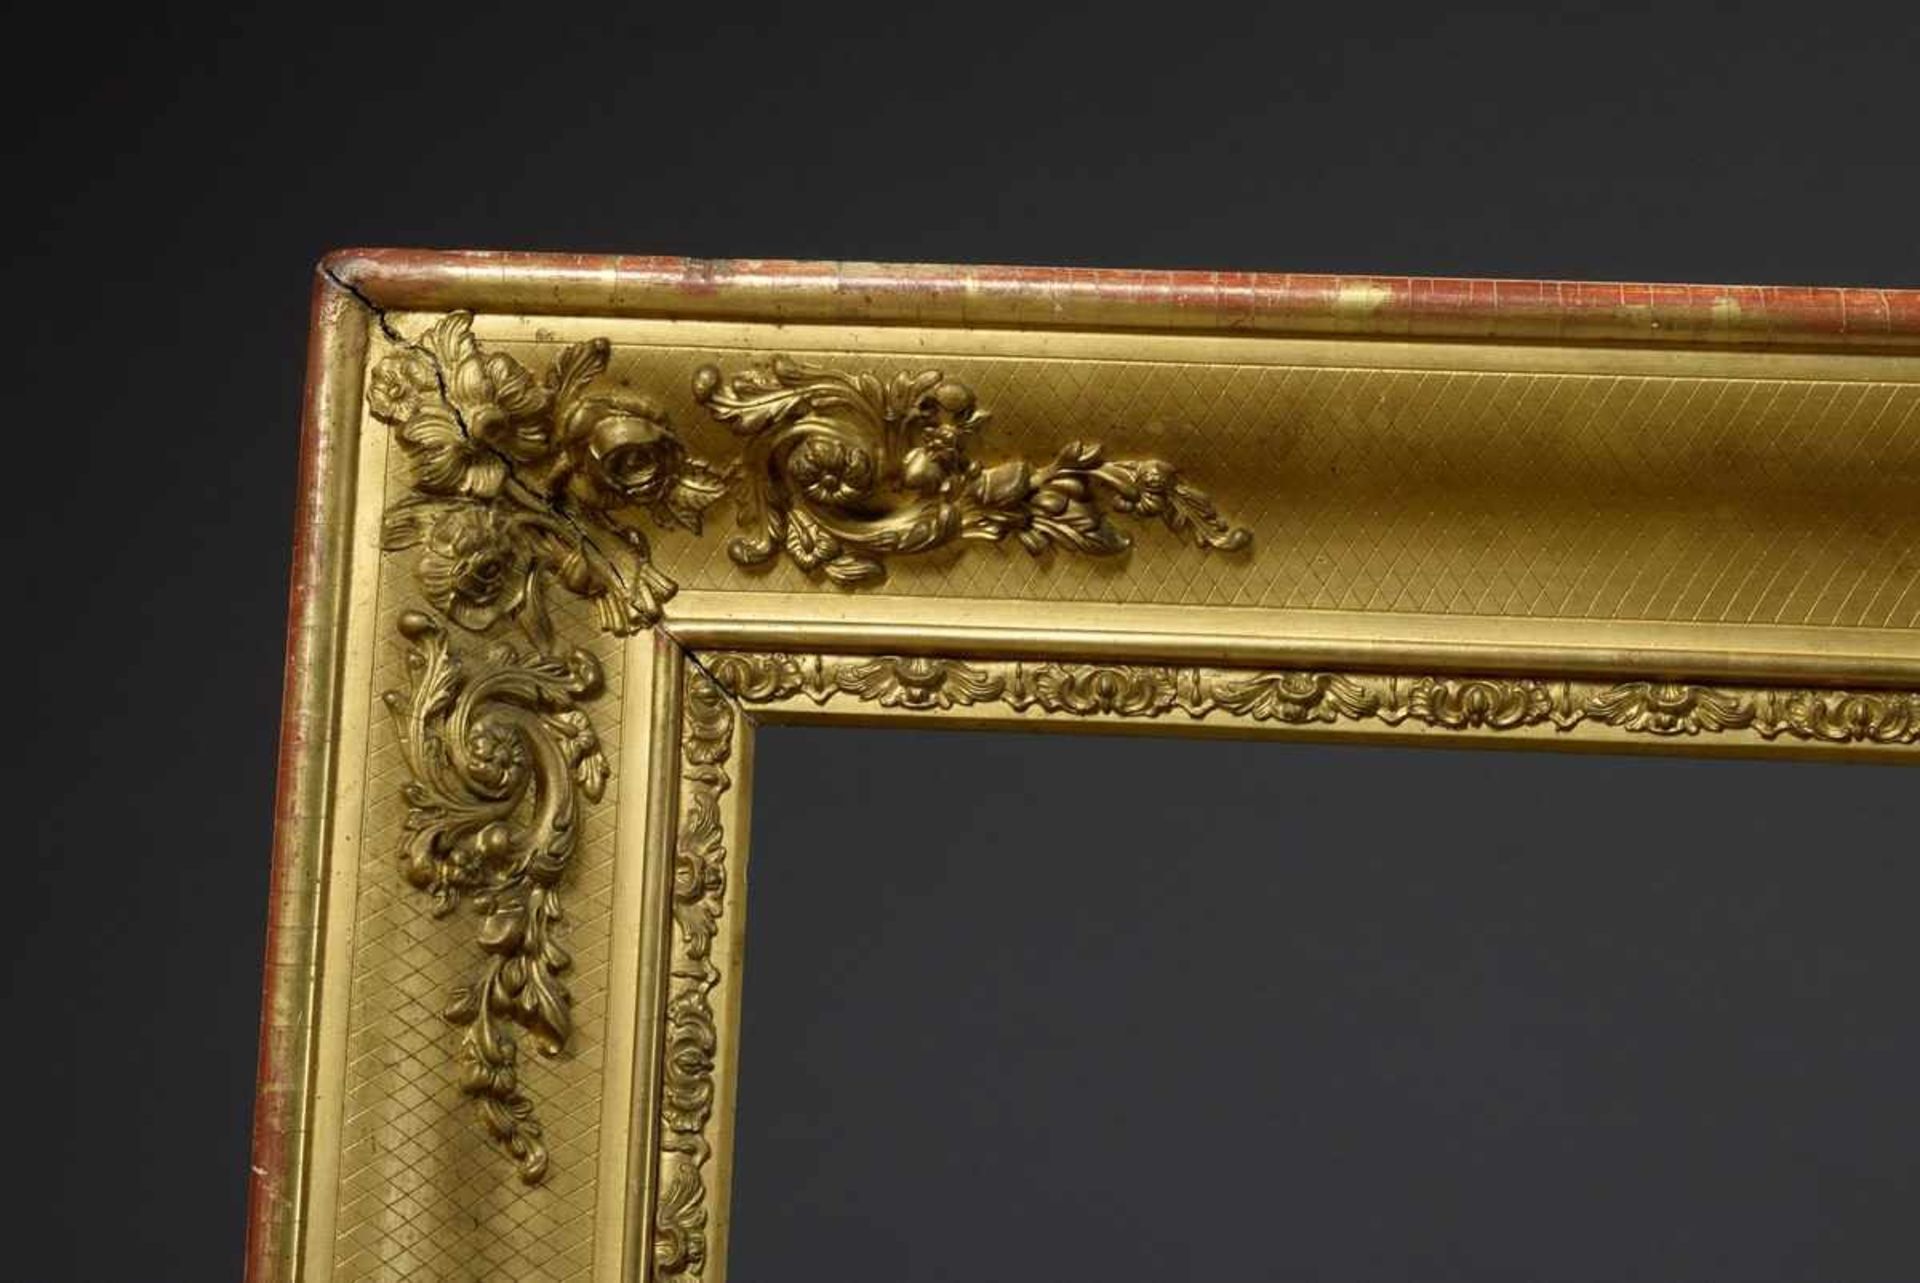 Big gilded frame with groove and stuccoed floral decor over rhombic pattern, 19th century, RD 79, - Bild 2 aus 4